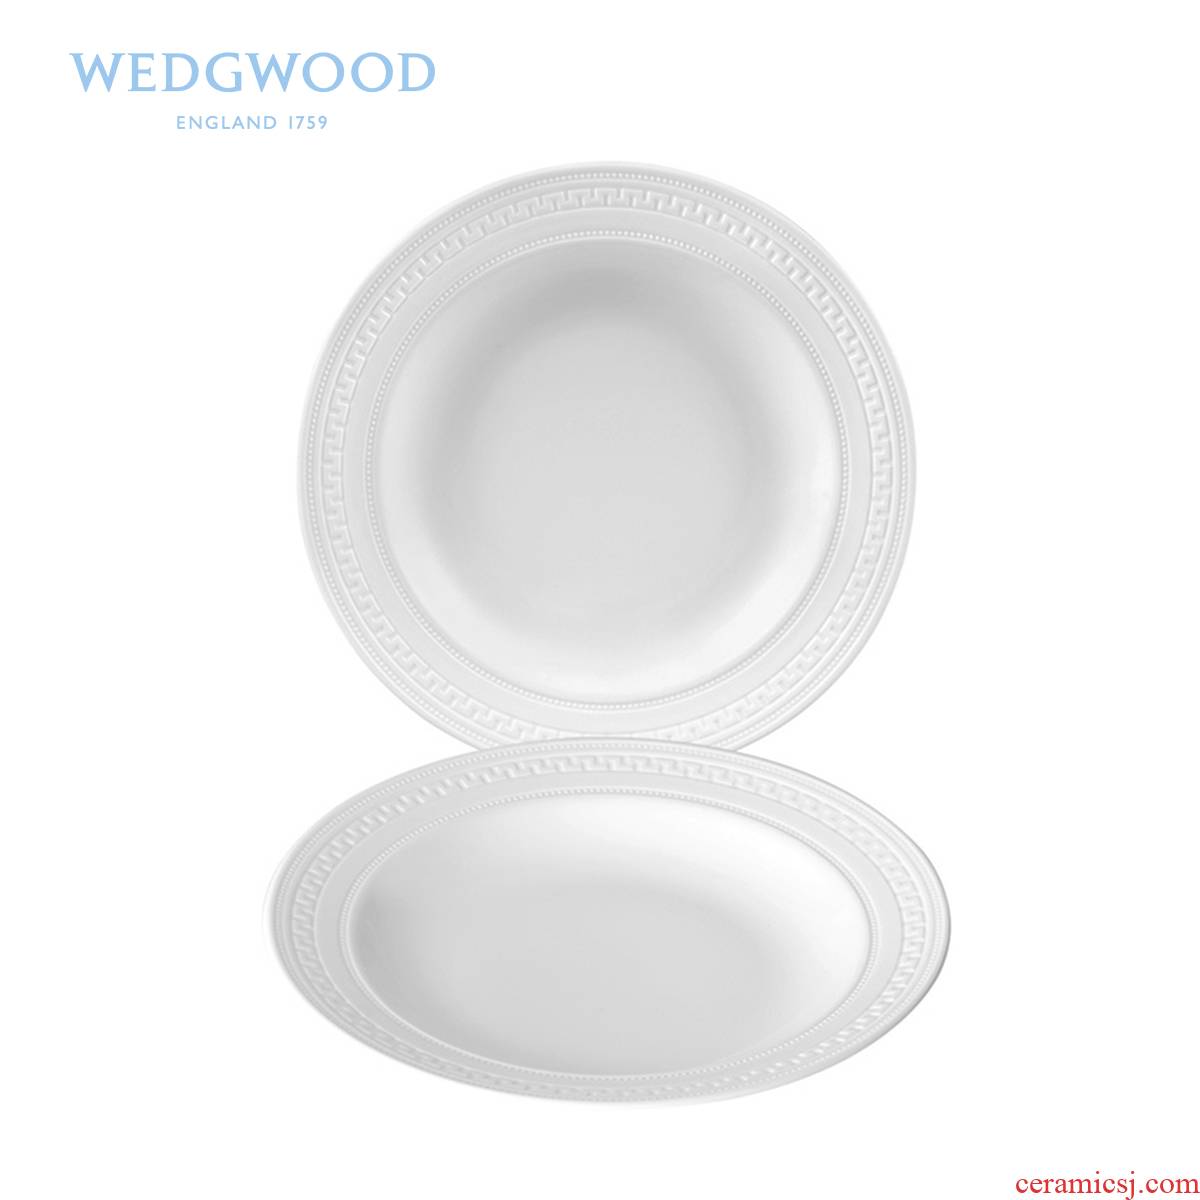 Wedgwood waterford Wedgwood Intaglio deep anaglyph 23 cm ipads porcelain plate 2 only cutlery set